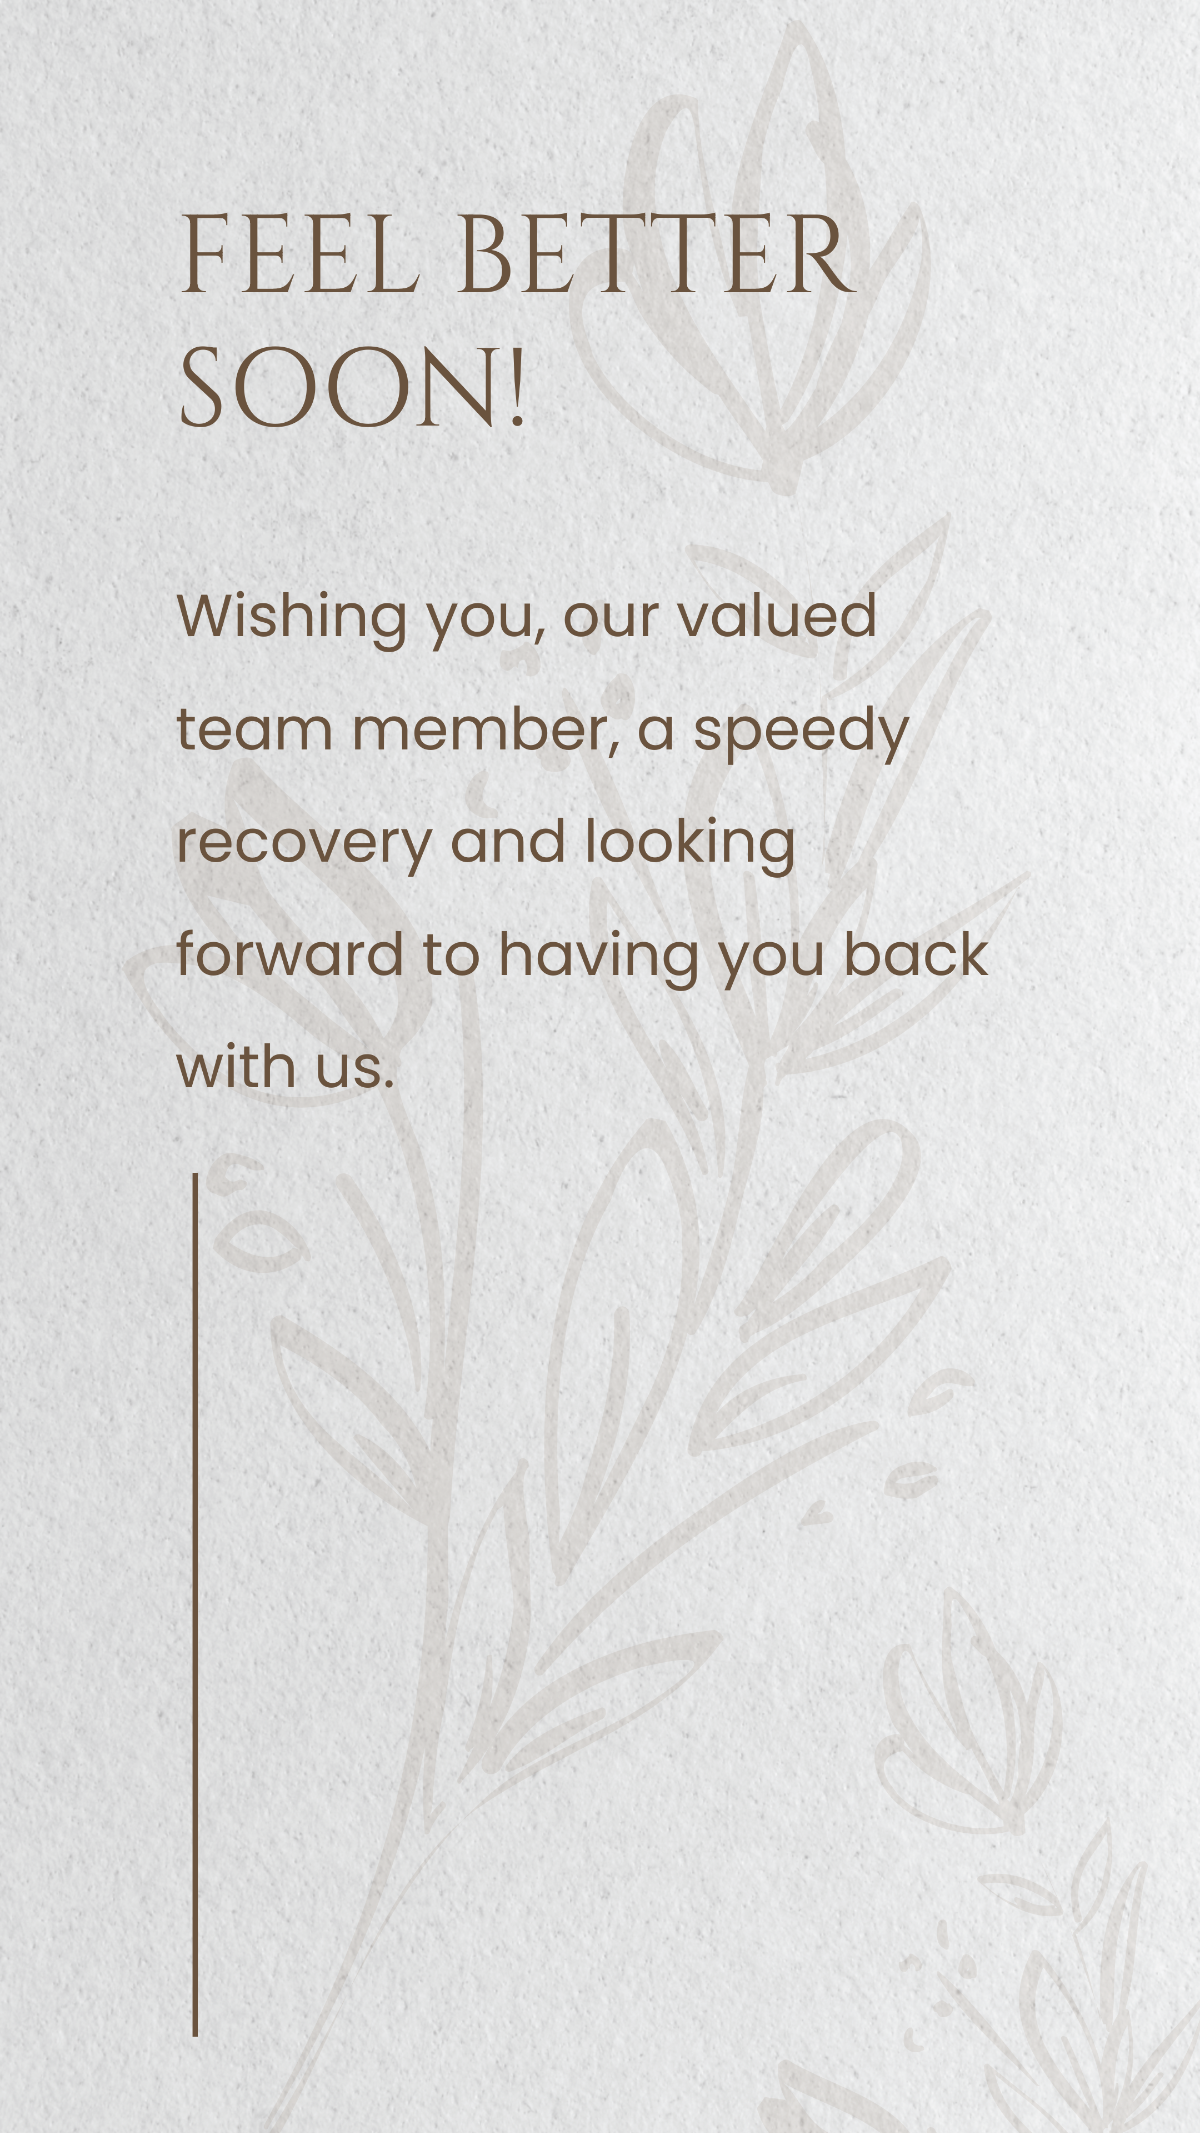 Get Well Soon Message For Team Member Template